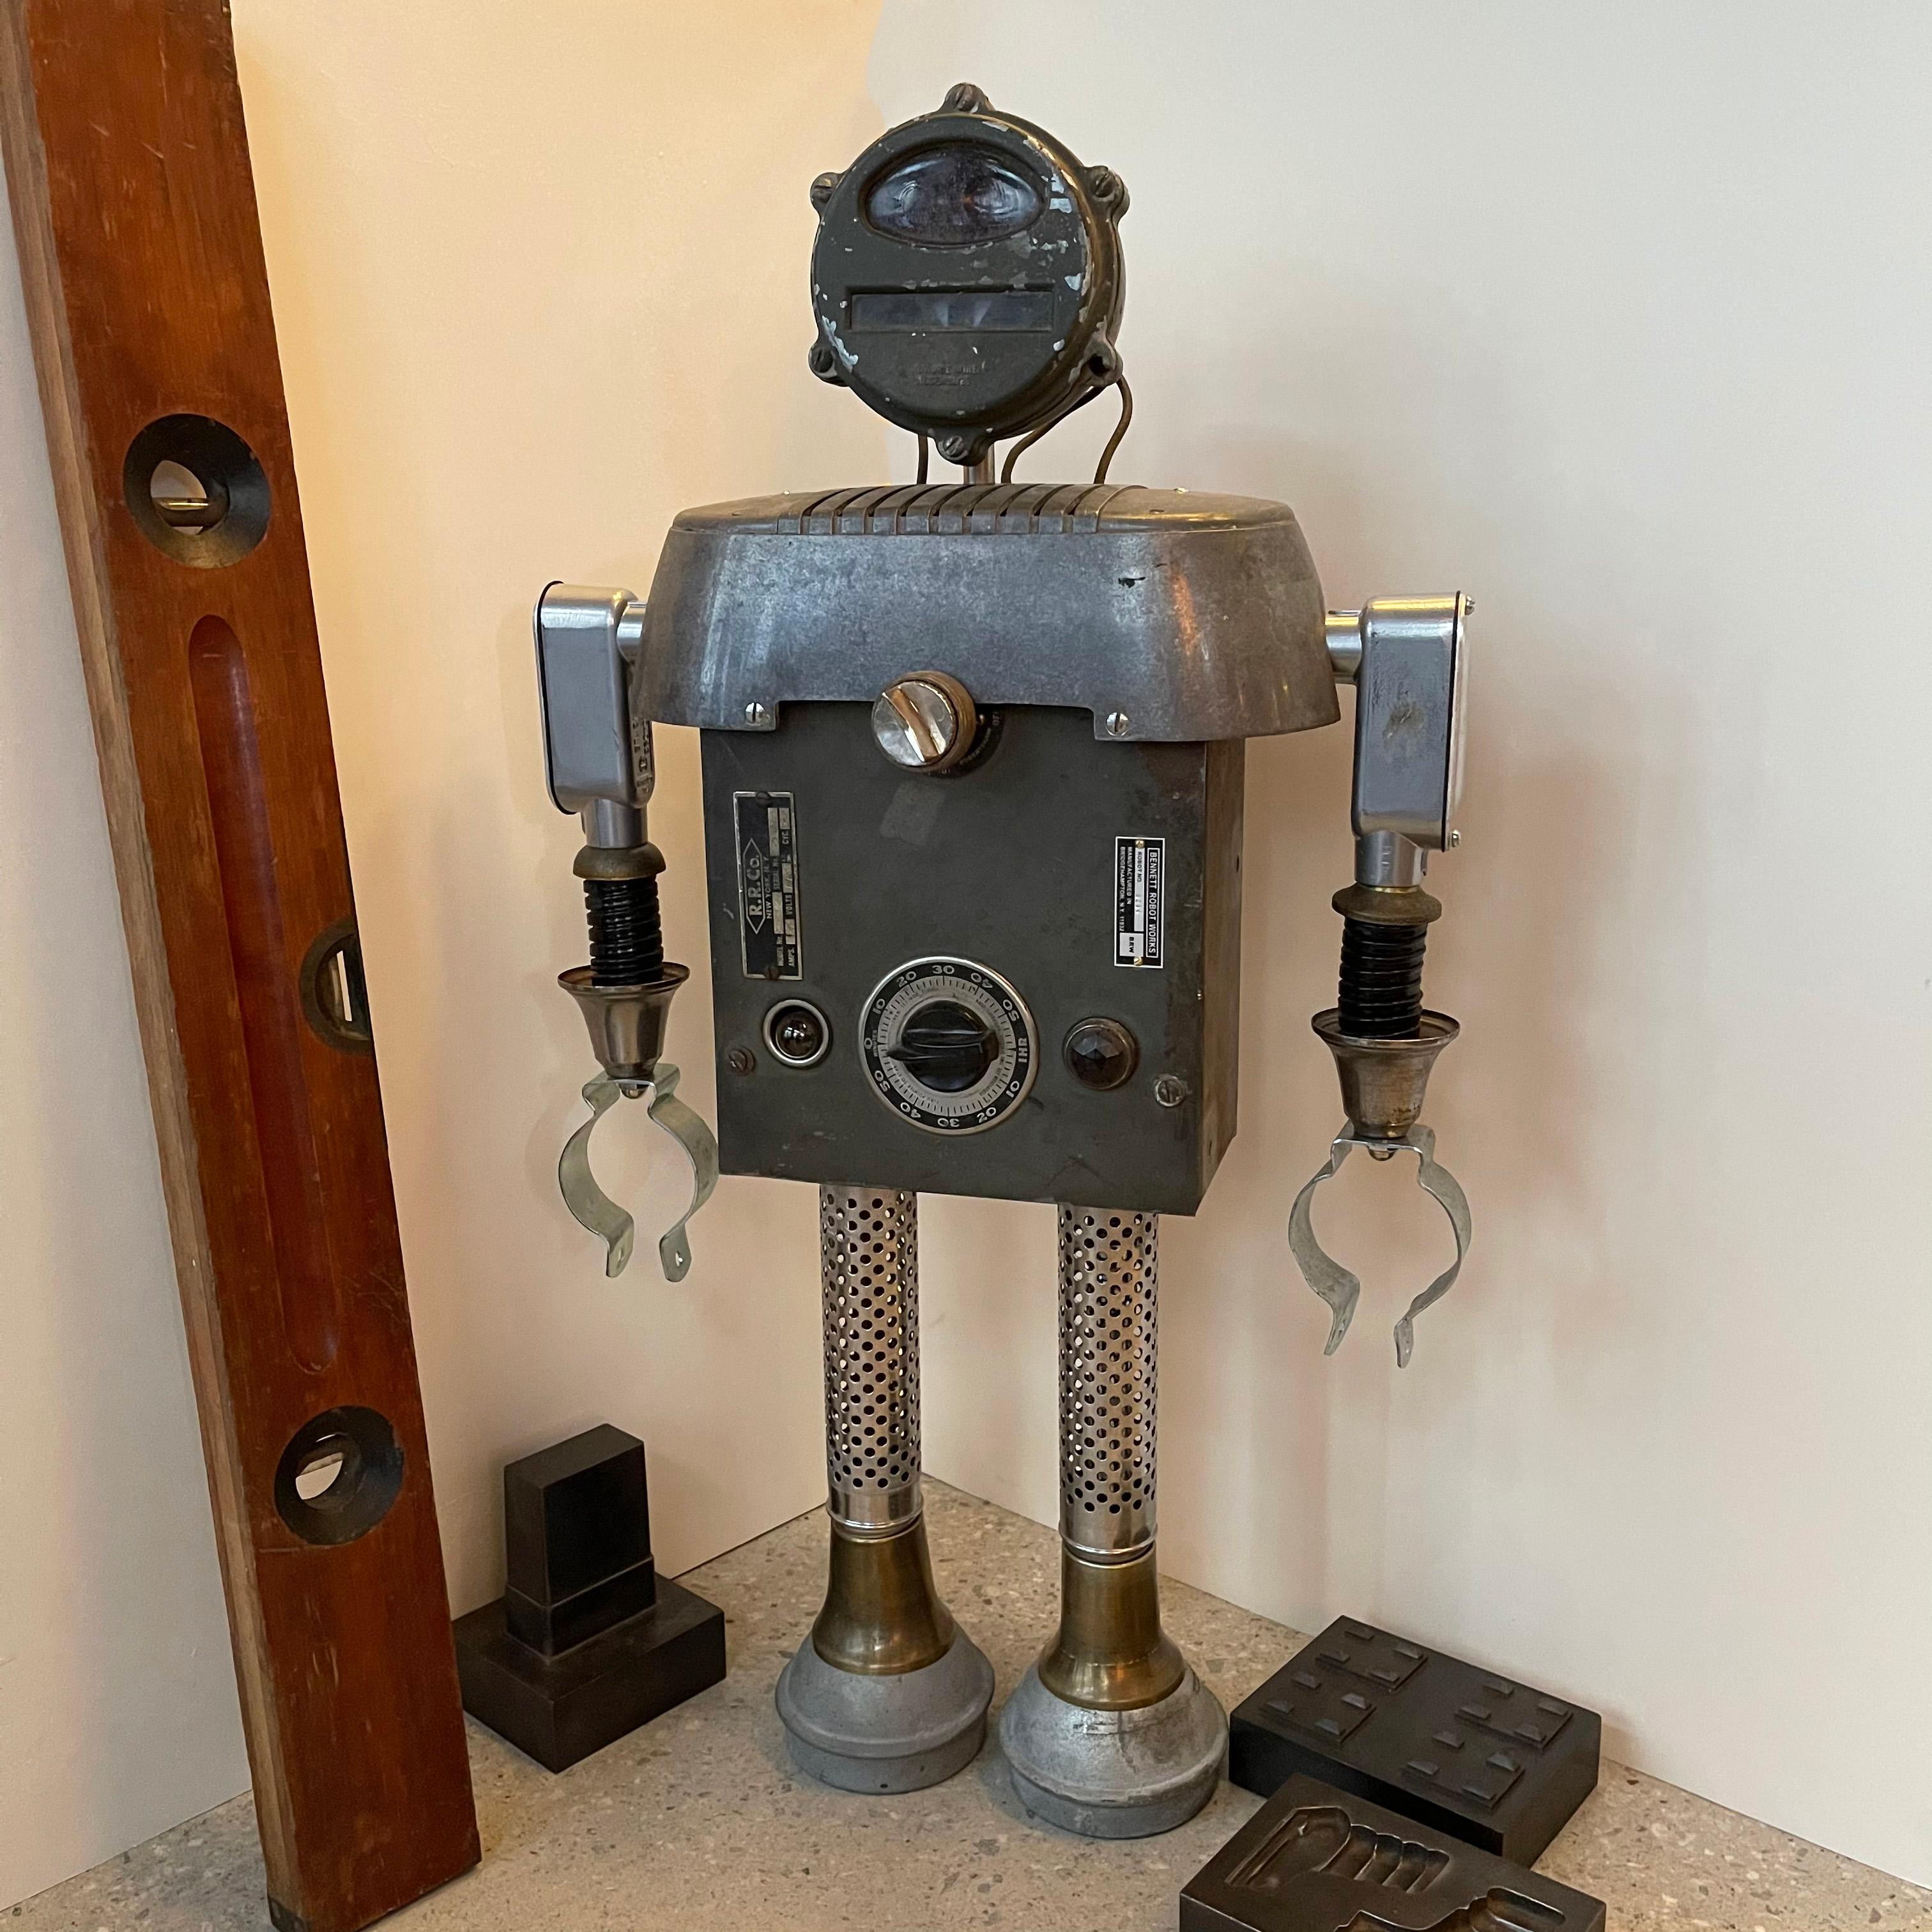 Custom robot sculpture named Markel by Bennett Robot Works, Brooklyn, NY

Bennett Robot Works, robot sculptures created by Gordon Bennett, are composed of found, vintage objects used in their unaltered entirety. They are inspired by Norman Bel